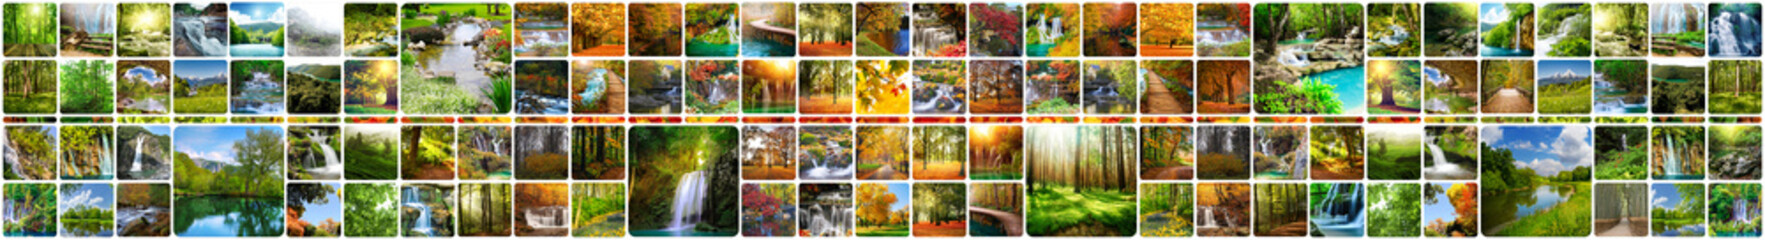 Collage summer and autumn forest